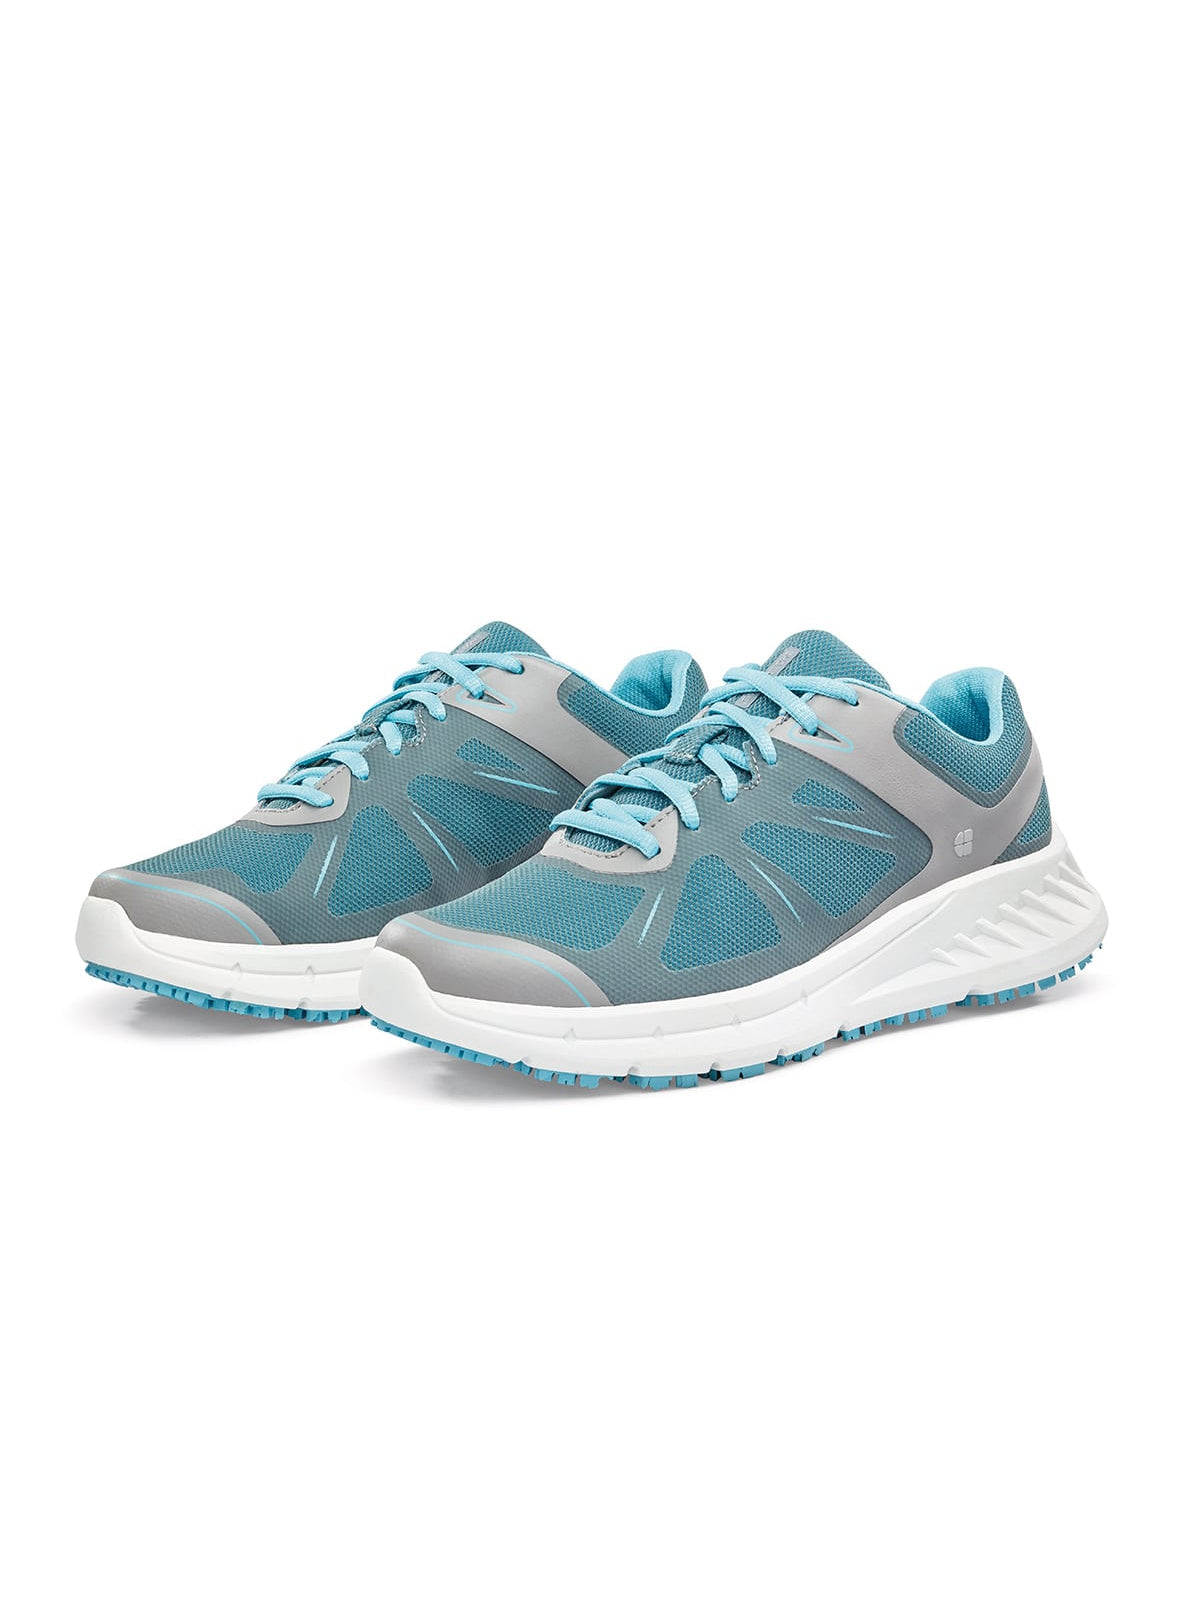 Women's Work Shoe Vitality Ii Blue by  Shoes For Crews.